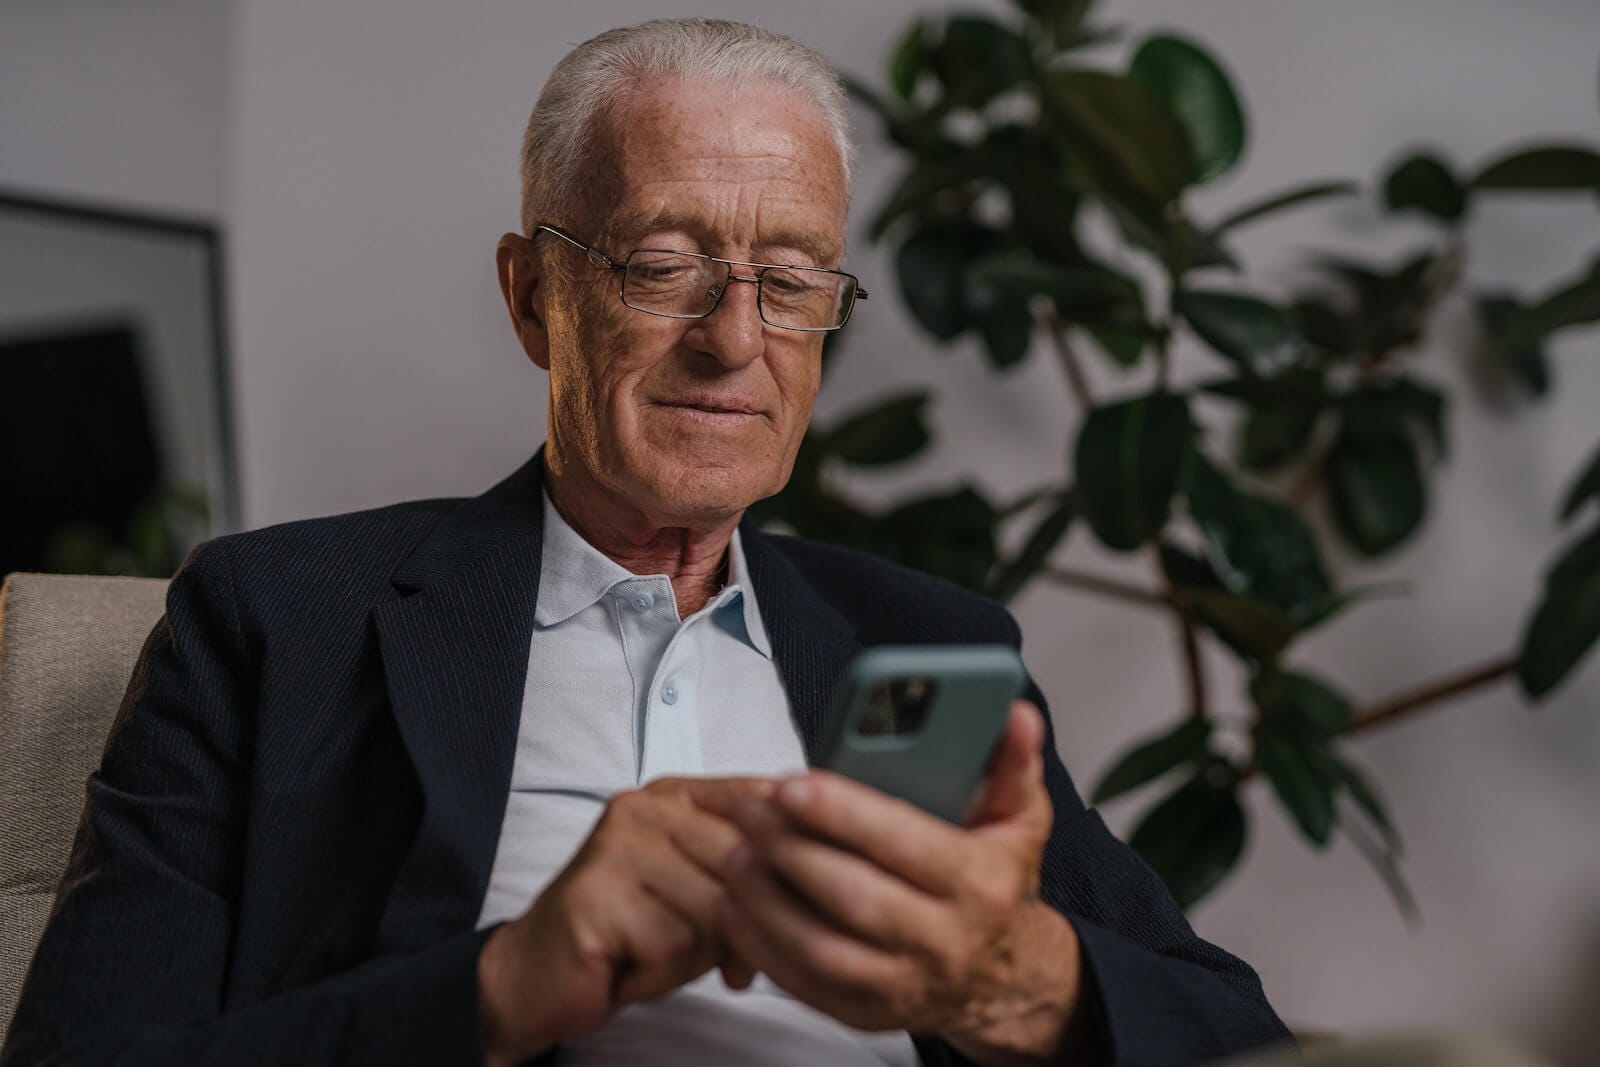 An older adult man wearing casual business clothing and glasses looks down at his smartphone.